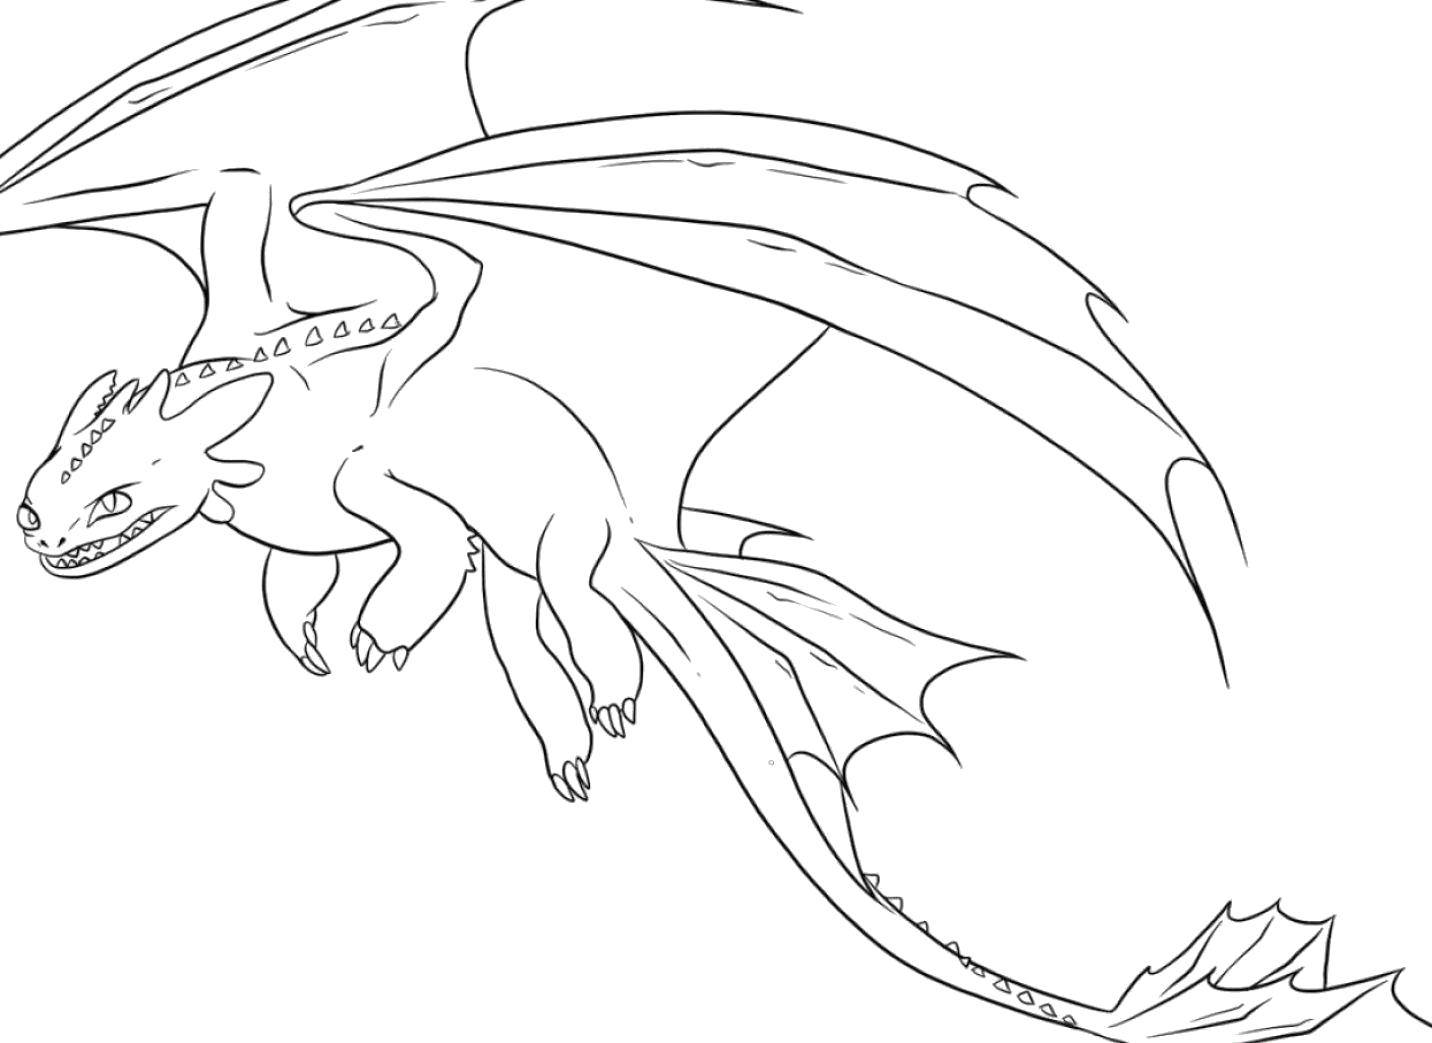 Coloring The dragon hovers in the air. Category Dragons. Tags:  Dragons.